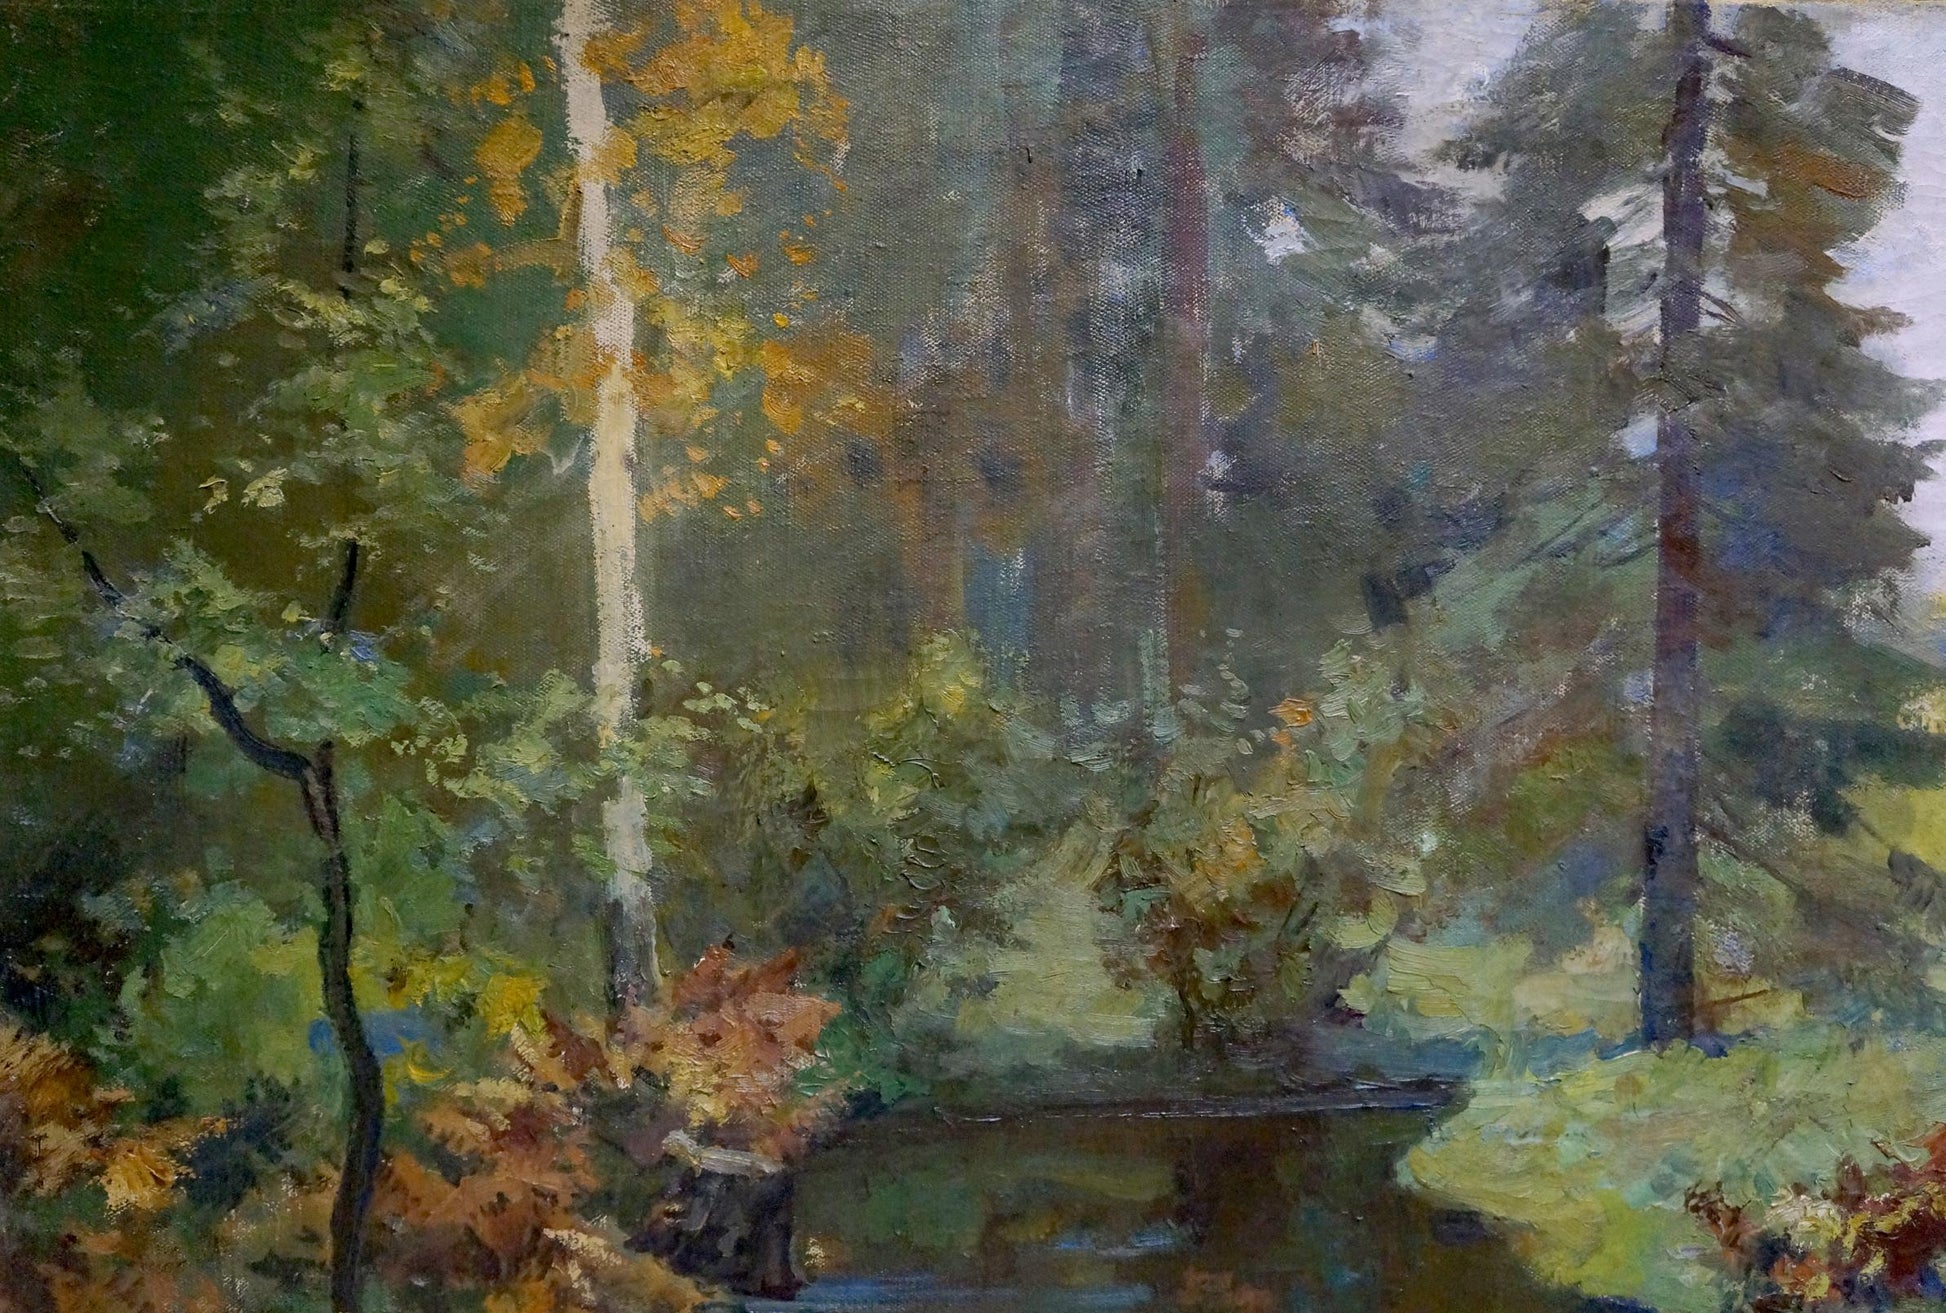 In Frents' oil painting, a forest stream is depicted